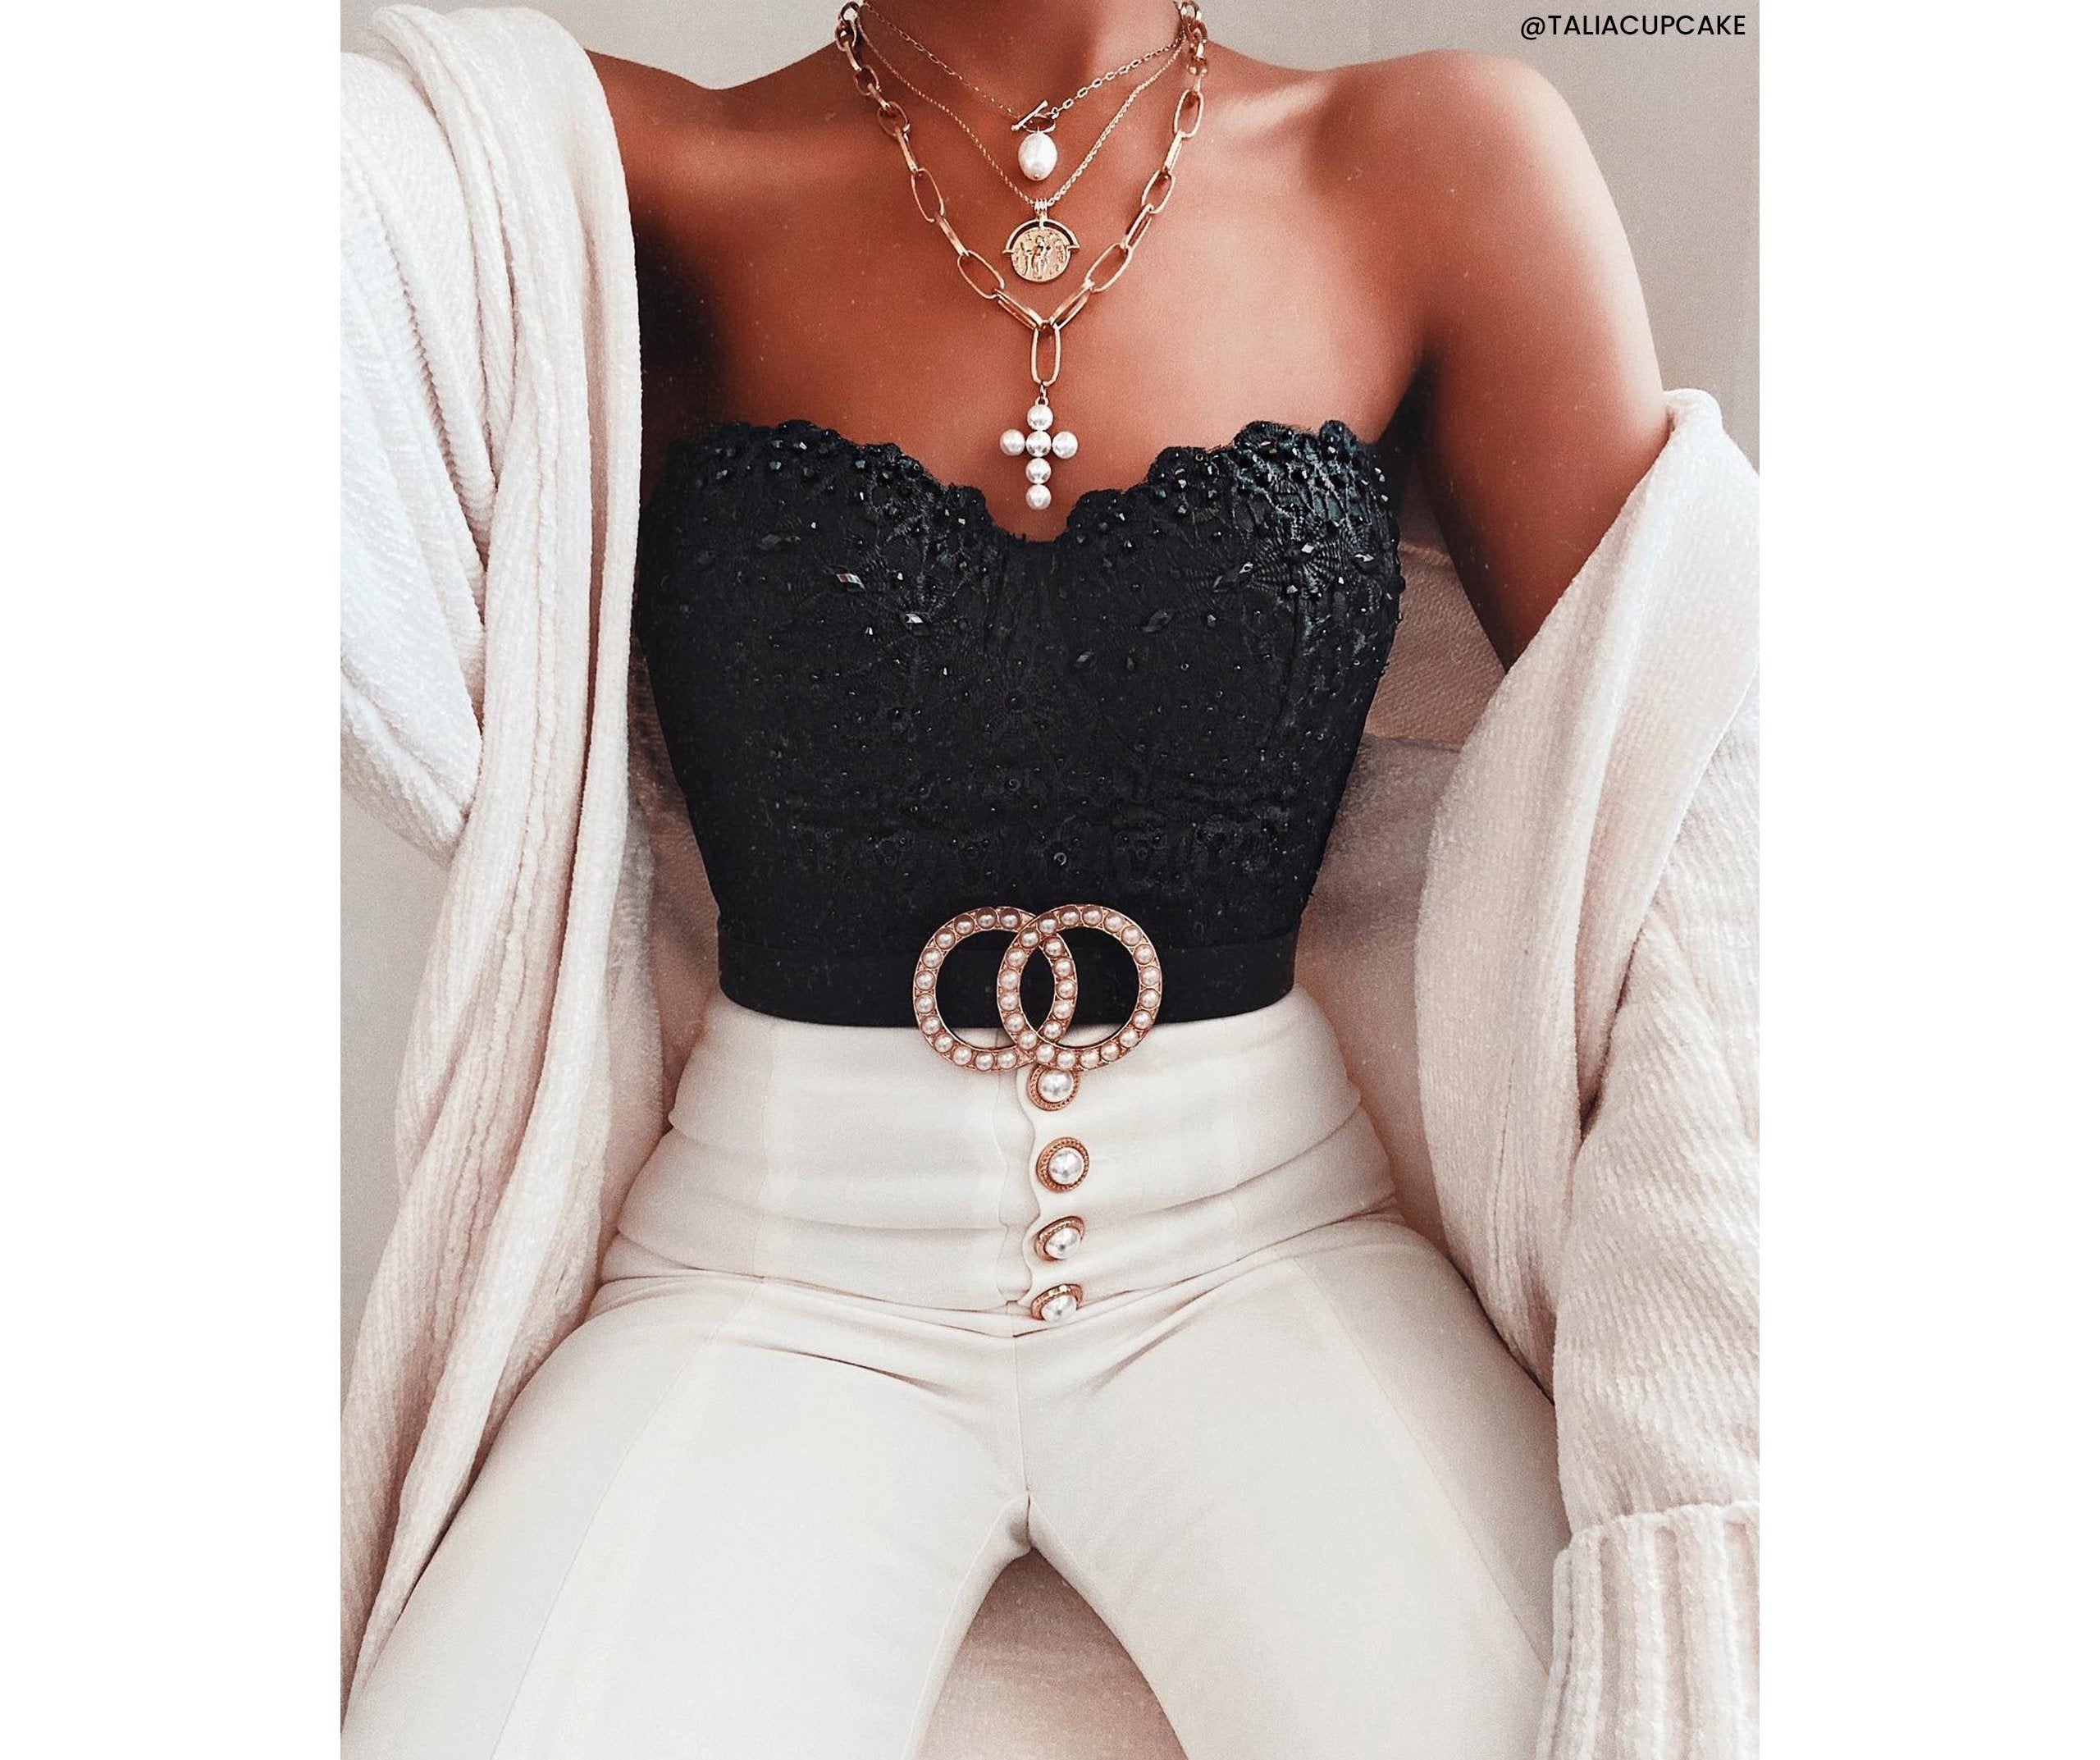 Reigning Lace Crop Top